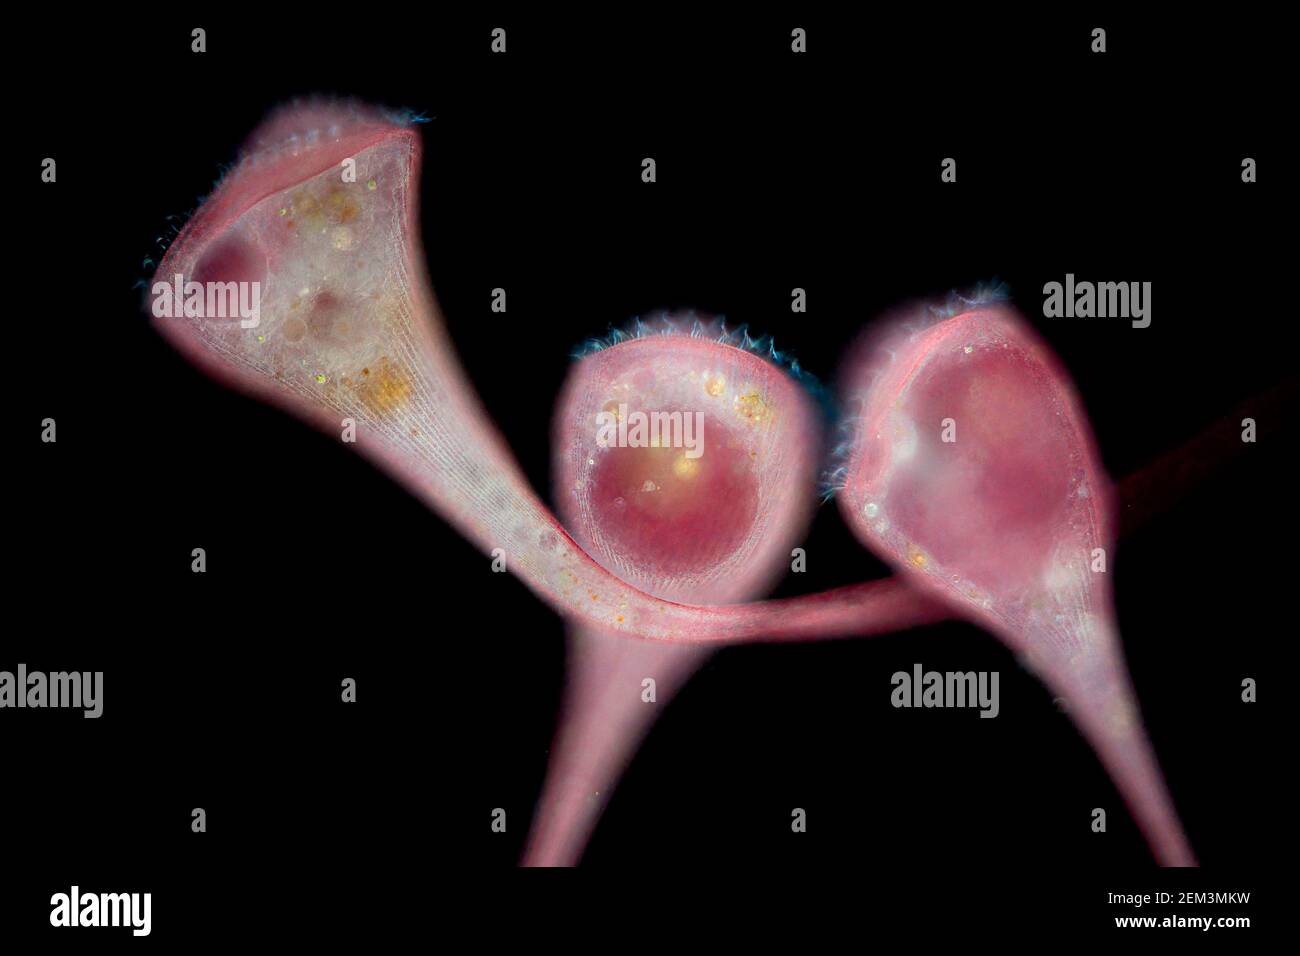 trumpet animalcule (Stentor igneus), dark field microscope image, magnification: x12 related to 36 mm, Europe, Germany Stock Photo